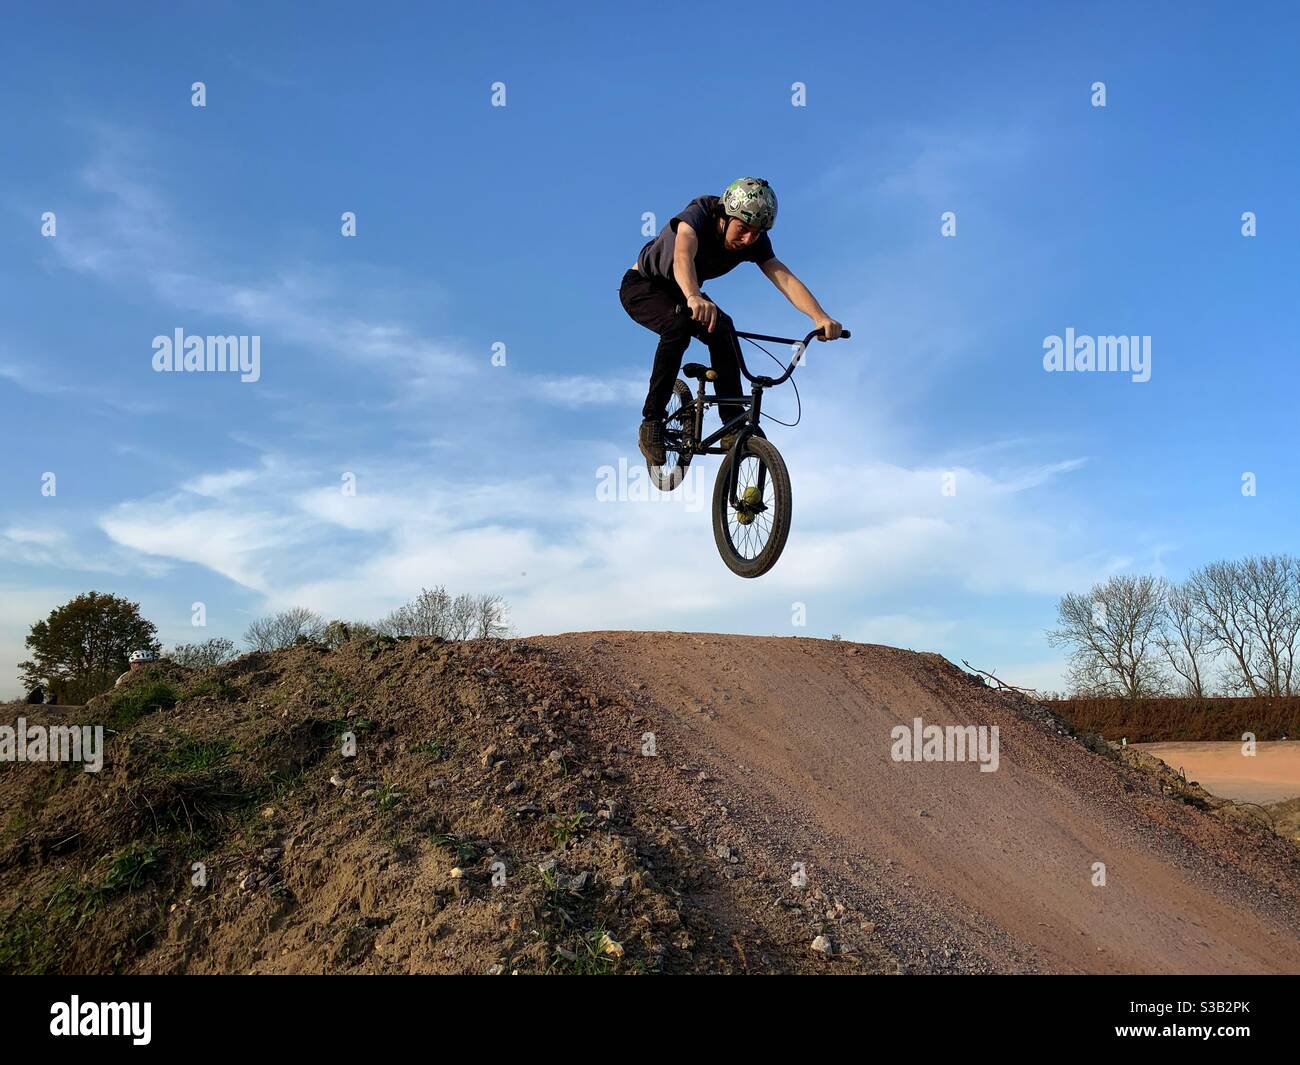 A man jumps his BMX bicycle while riding an off-road course near Fleet in Hampshire, England. Stock Photo